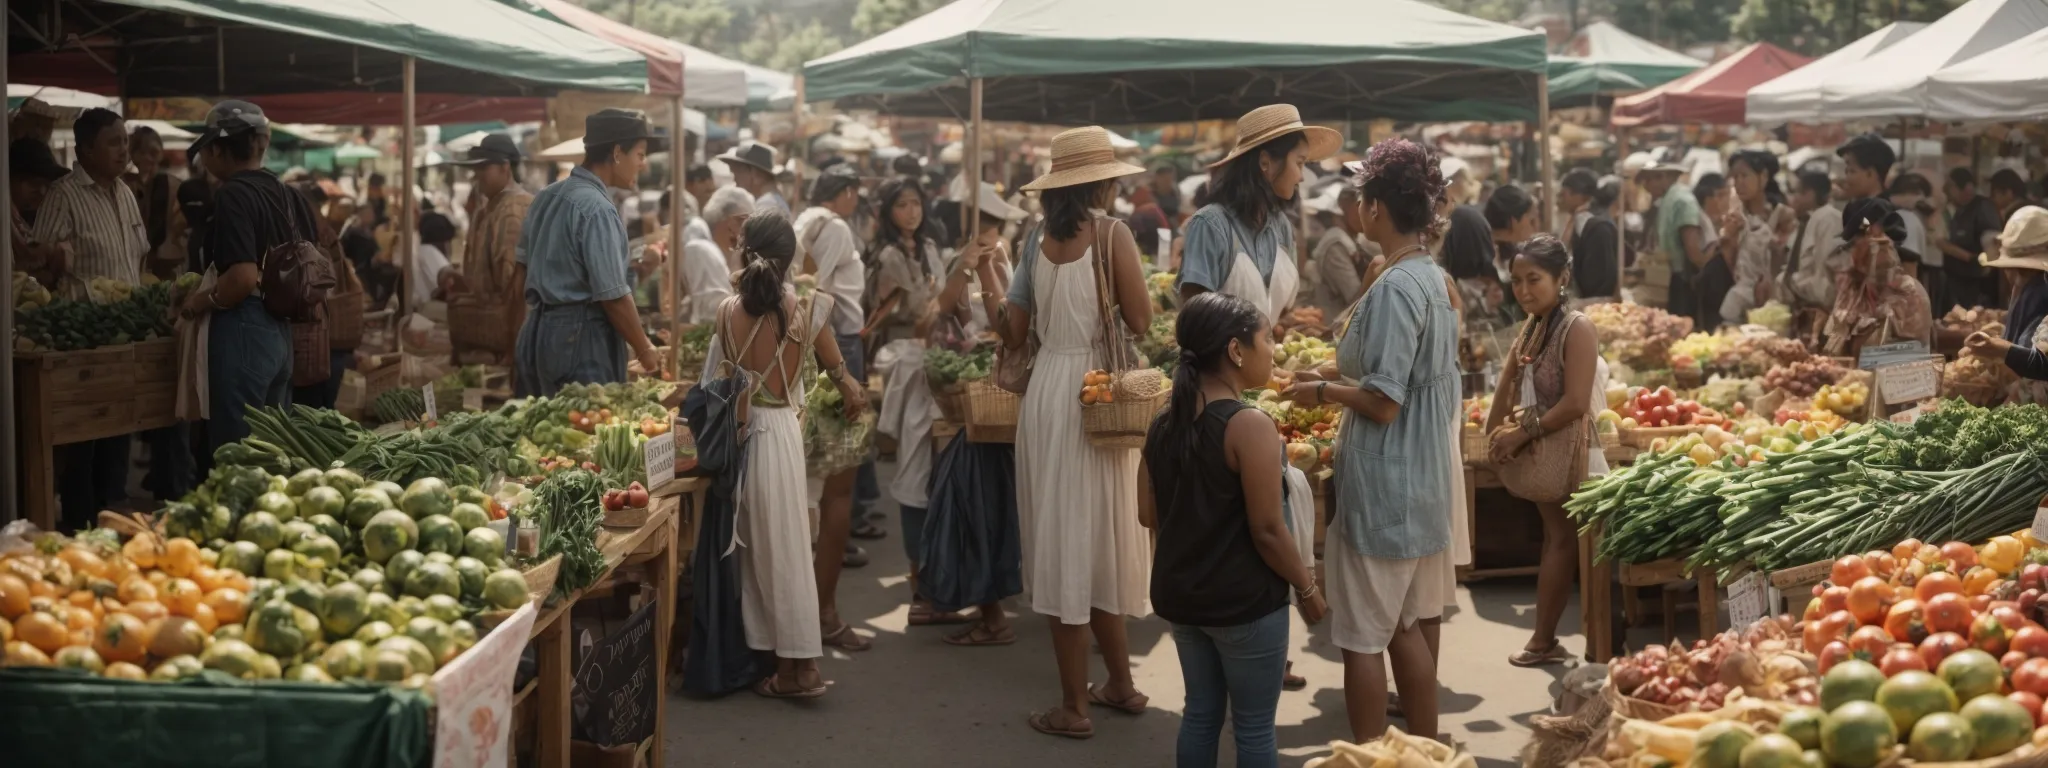 a local farmer's market bustling with community members interacting with vendors against a backdrop of fresh produce and handmade goods.